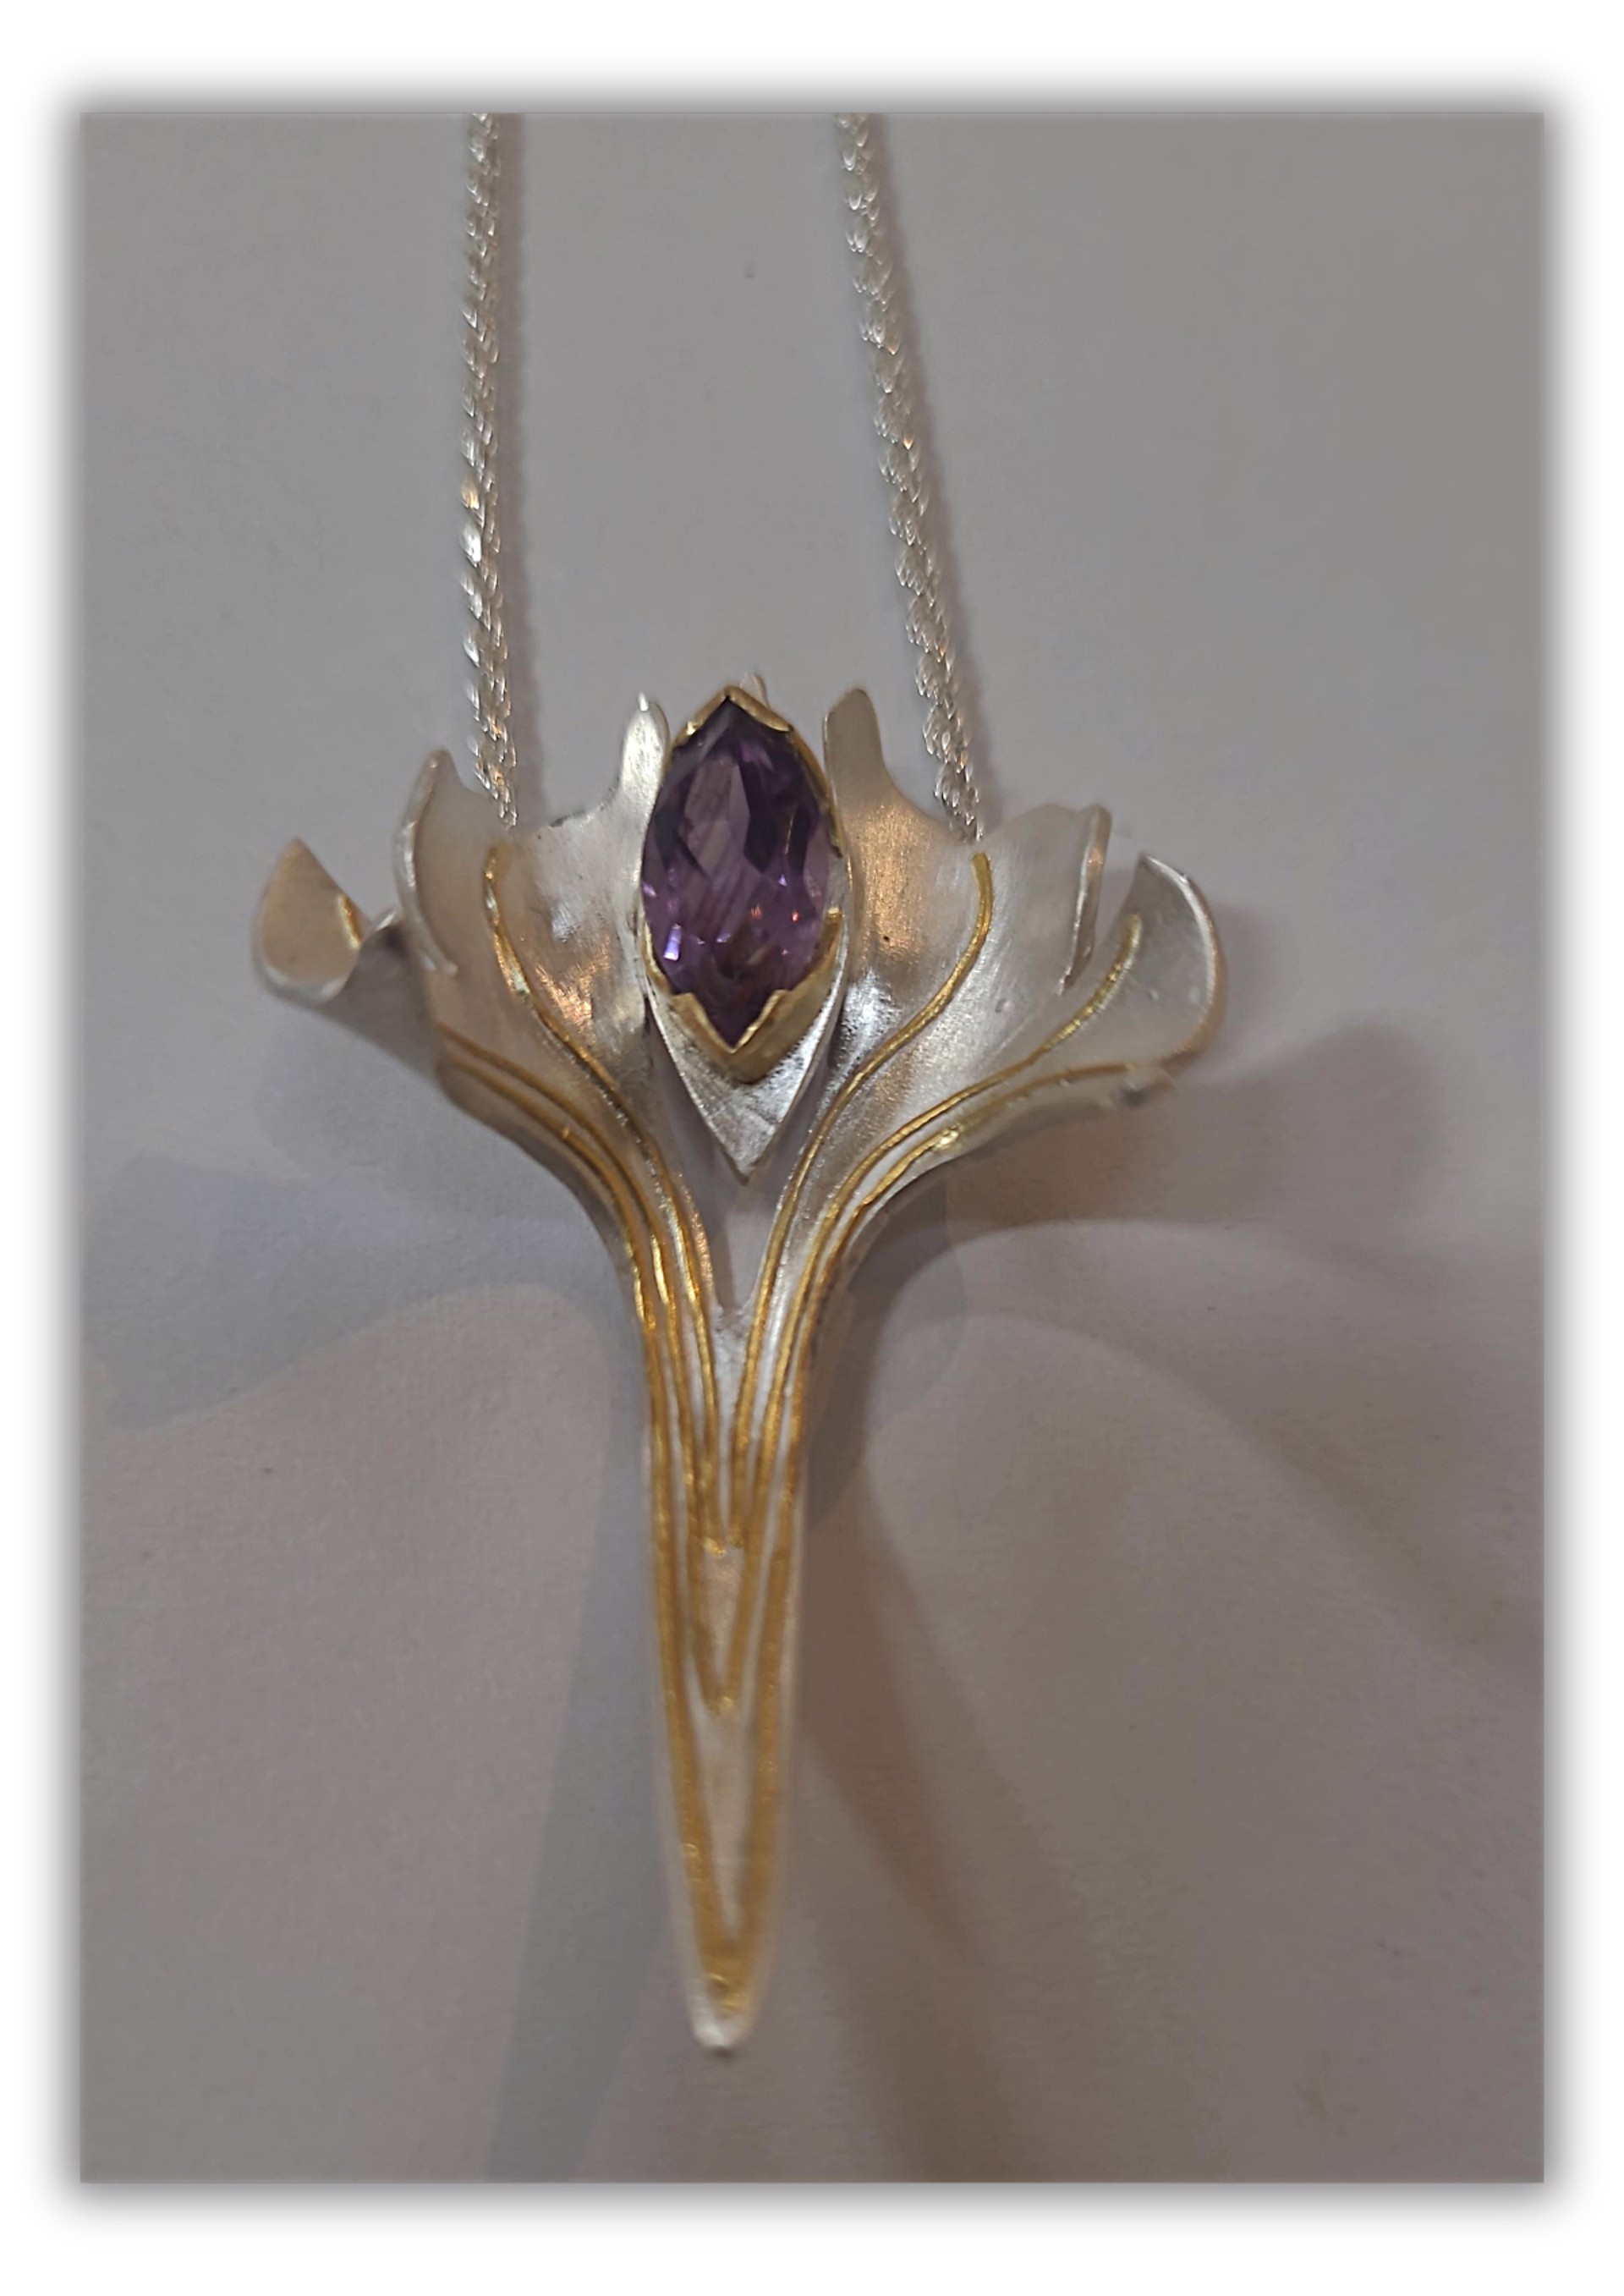 Necklace - Sterling Silver and 22k Gold Ginko Leaf with Amethyst by Pattie Parkhurst